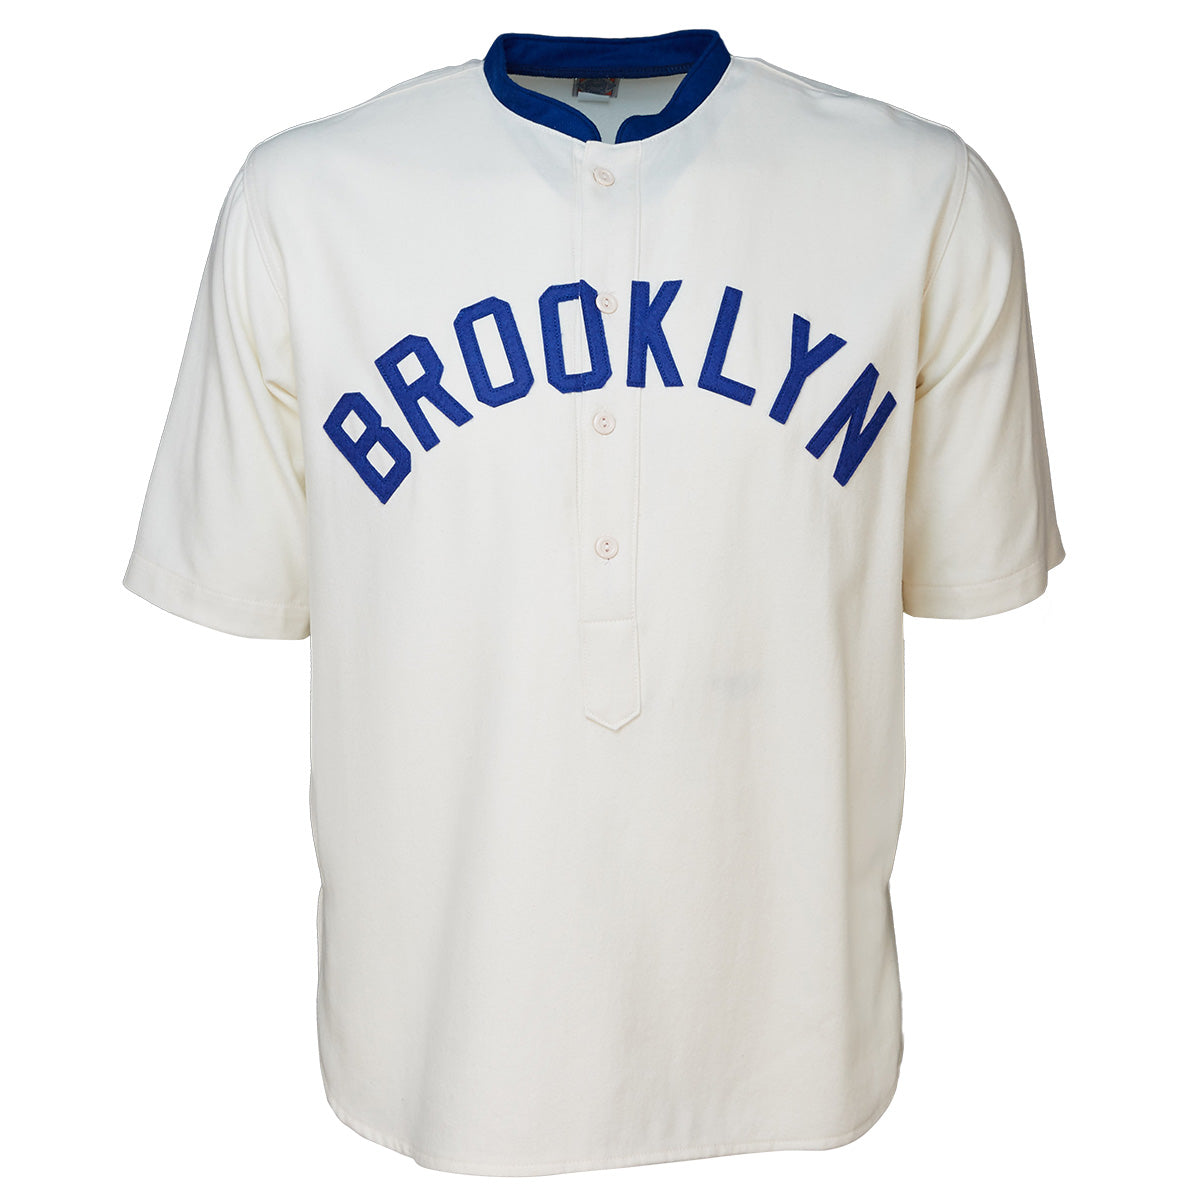 Brooklyn Tip-Tops 1914 Home Jersey